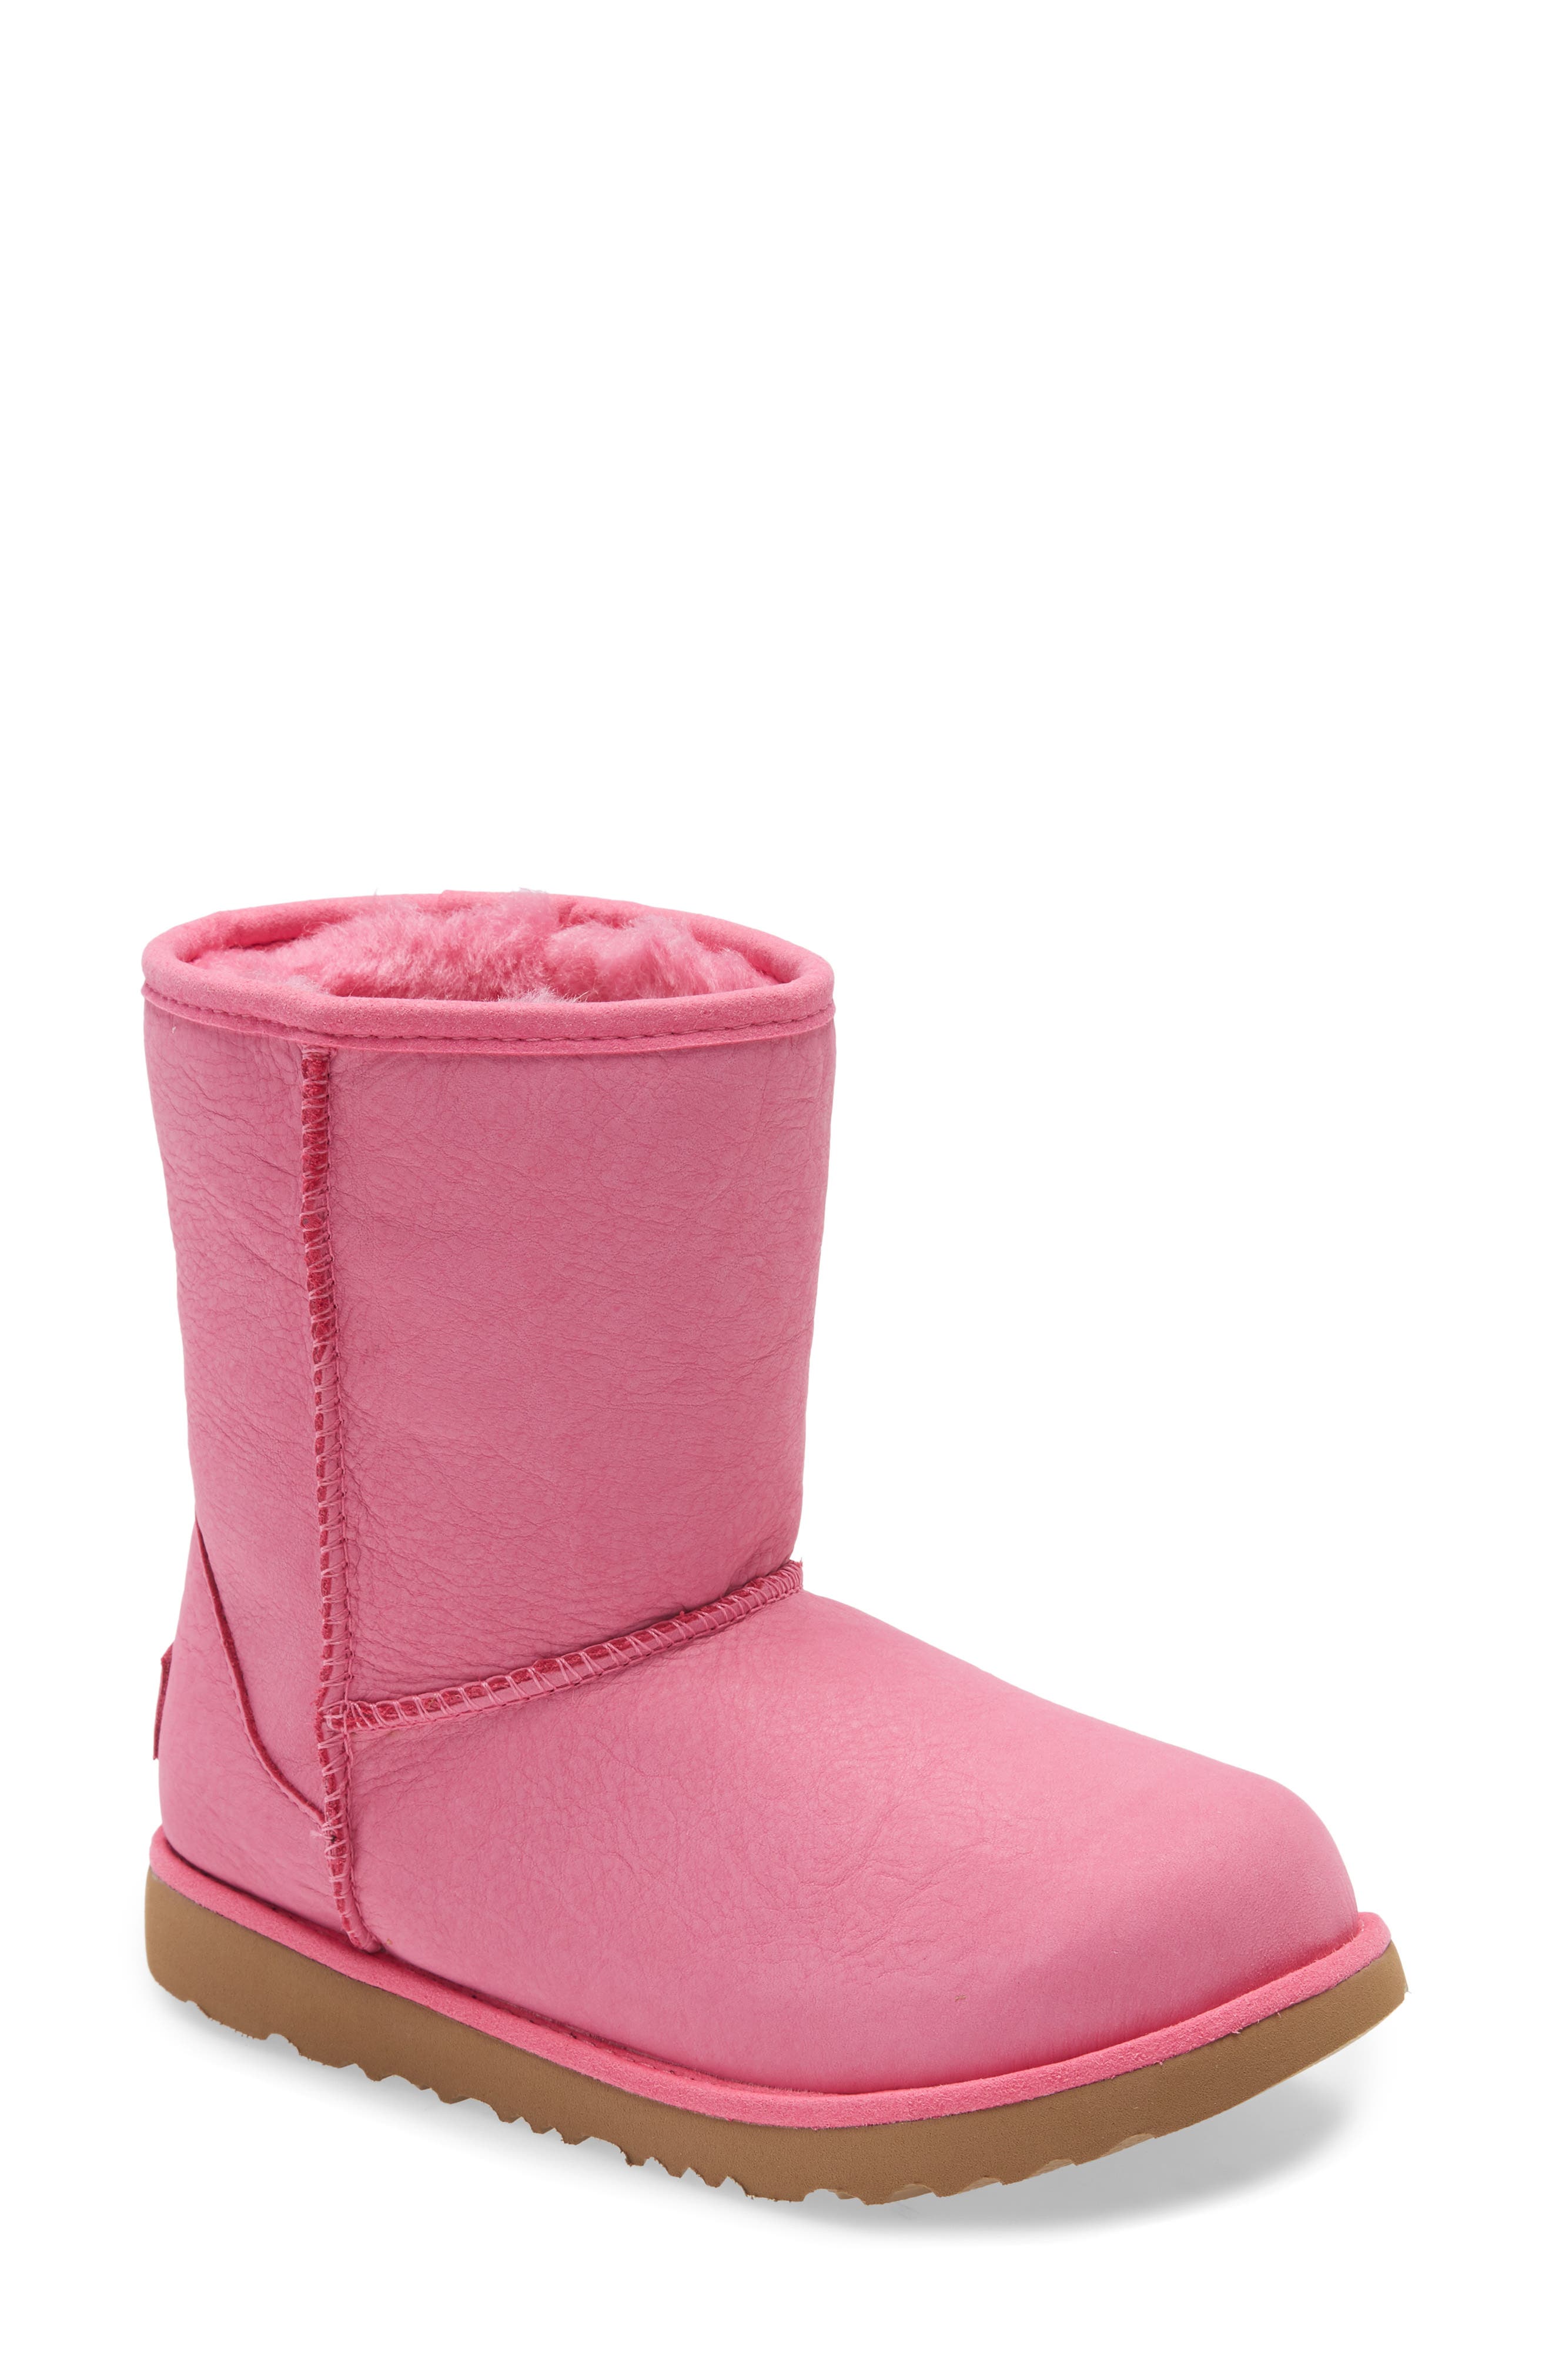 pink ugg boots for girls